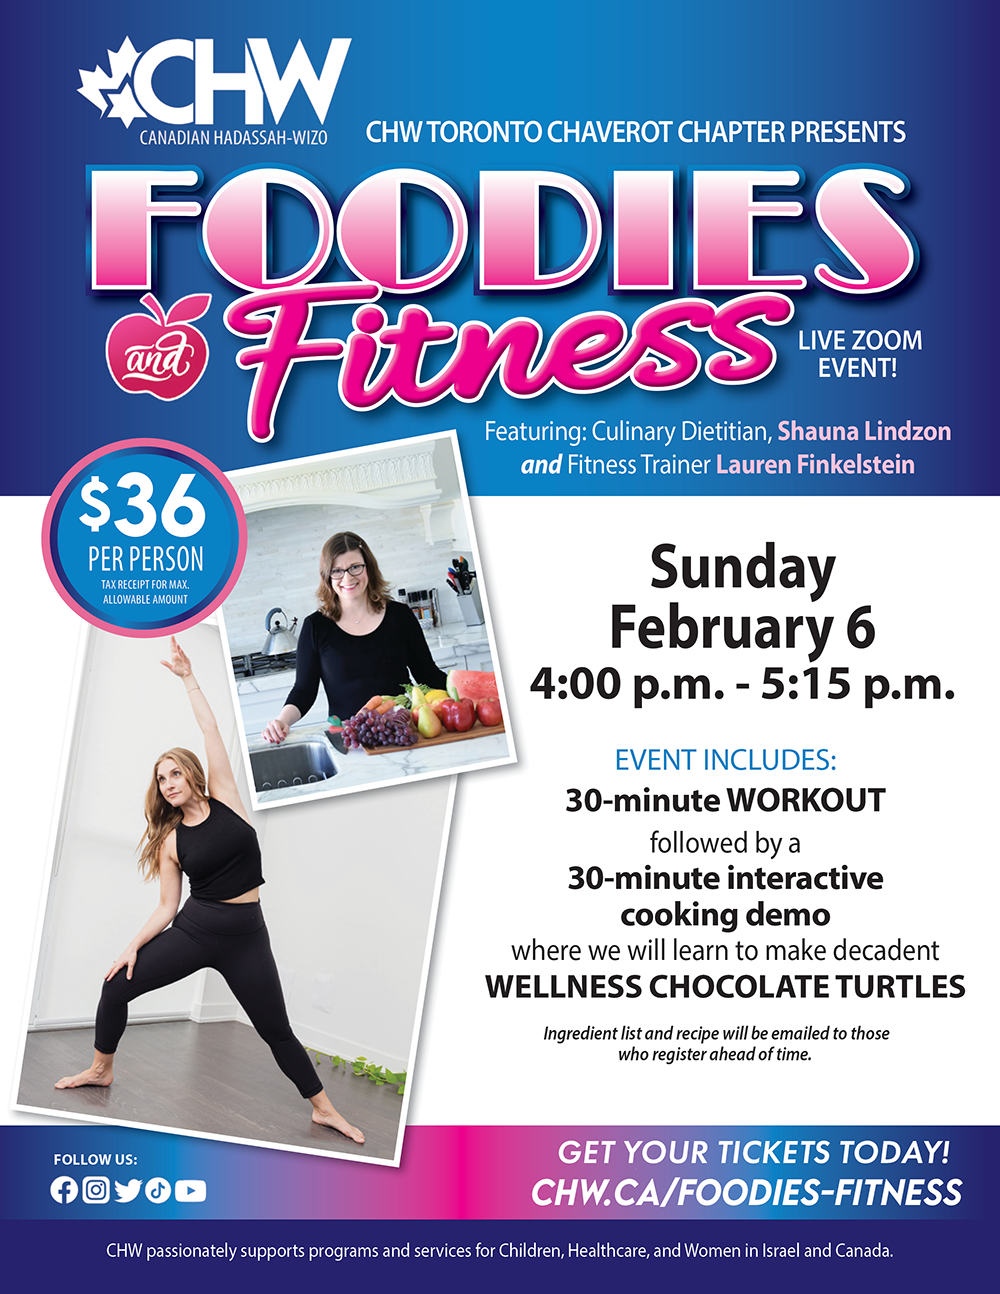 Foodies and Fitness Flyer 2022 resized.png